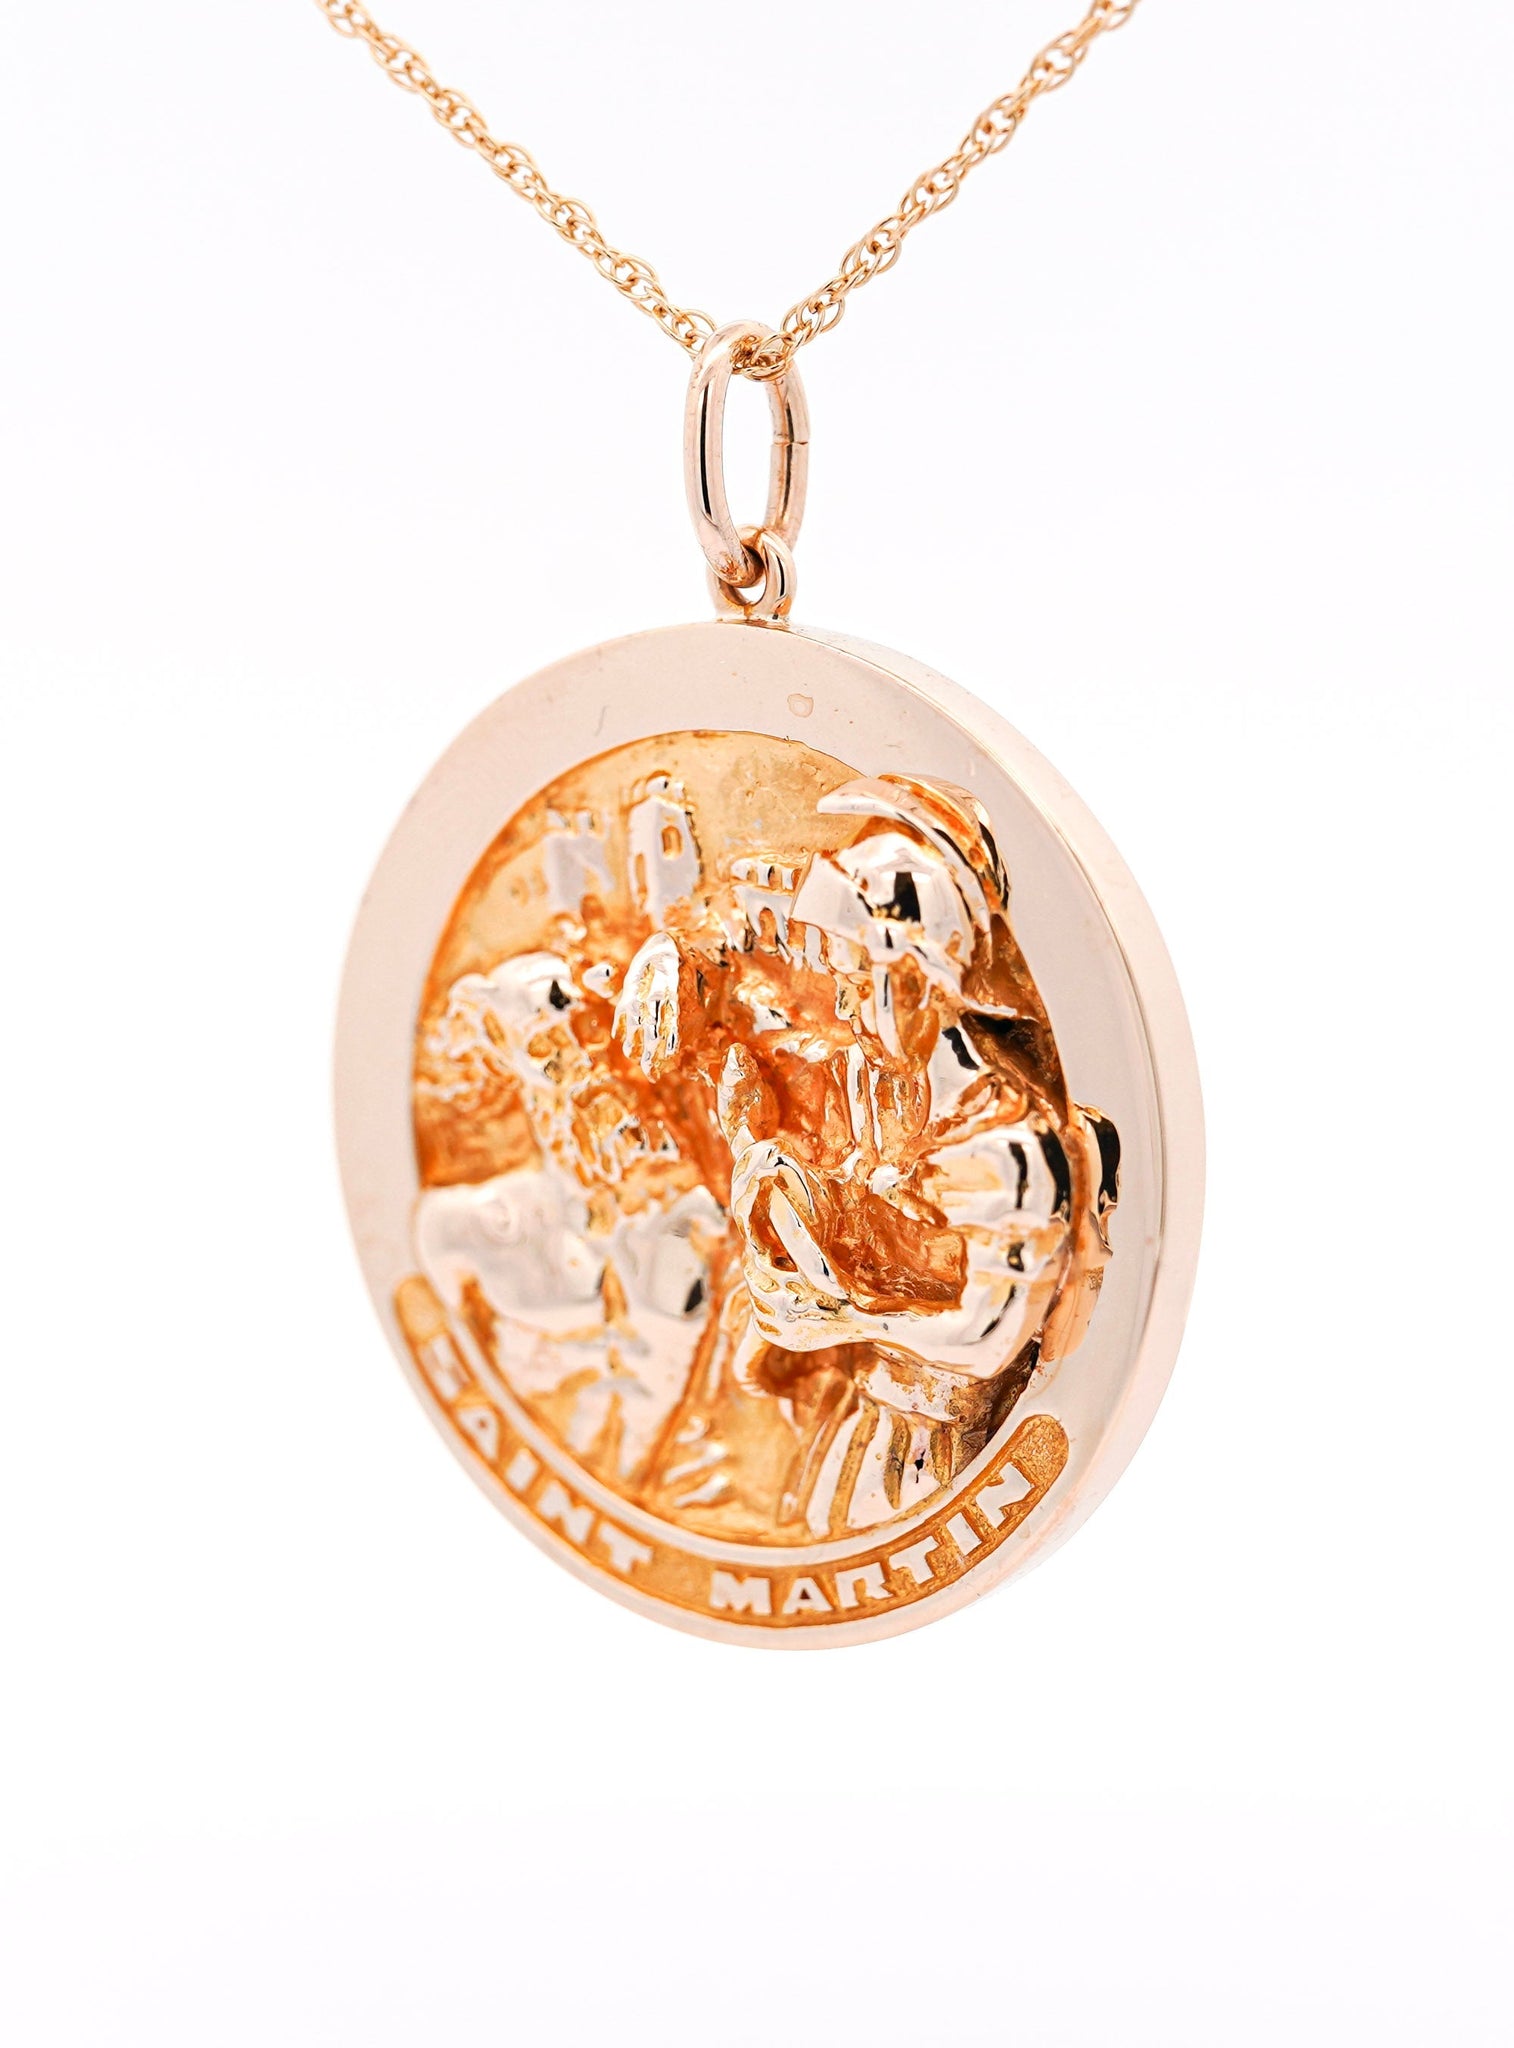 Vintage 14k Solid Gold Carved Medallion Pendant (Set of 3) by William Ruser - Our Lady of Fatima, Saint Martin, Saint George